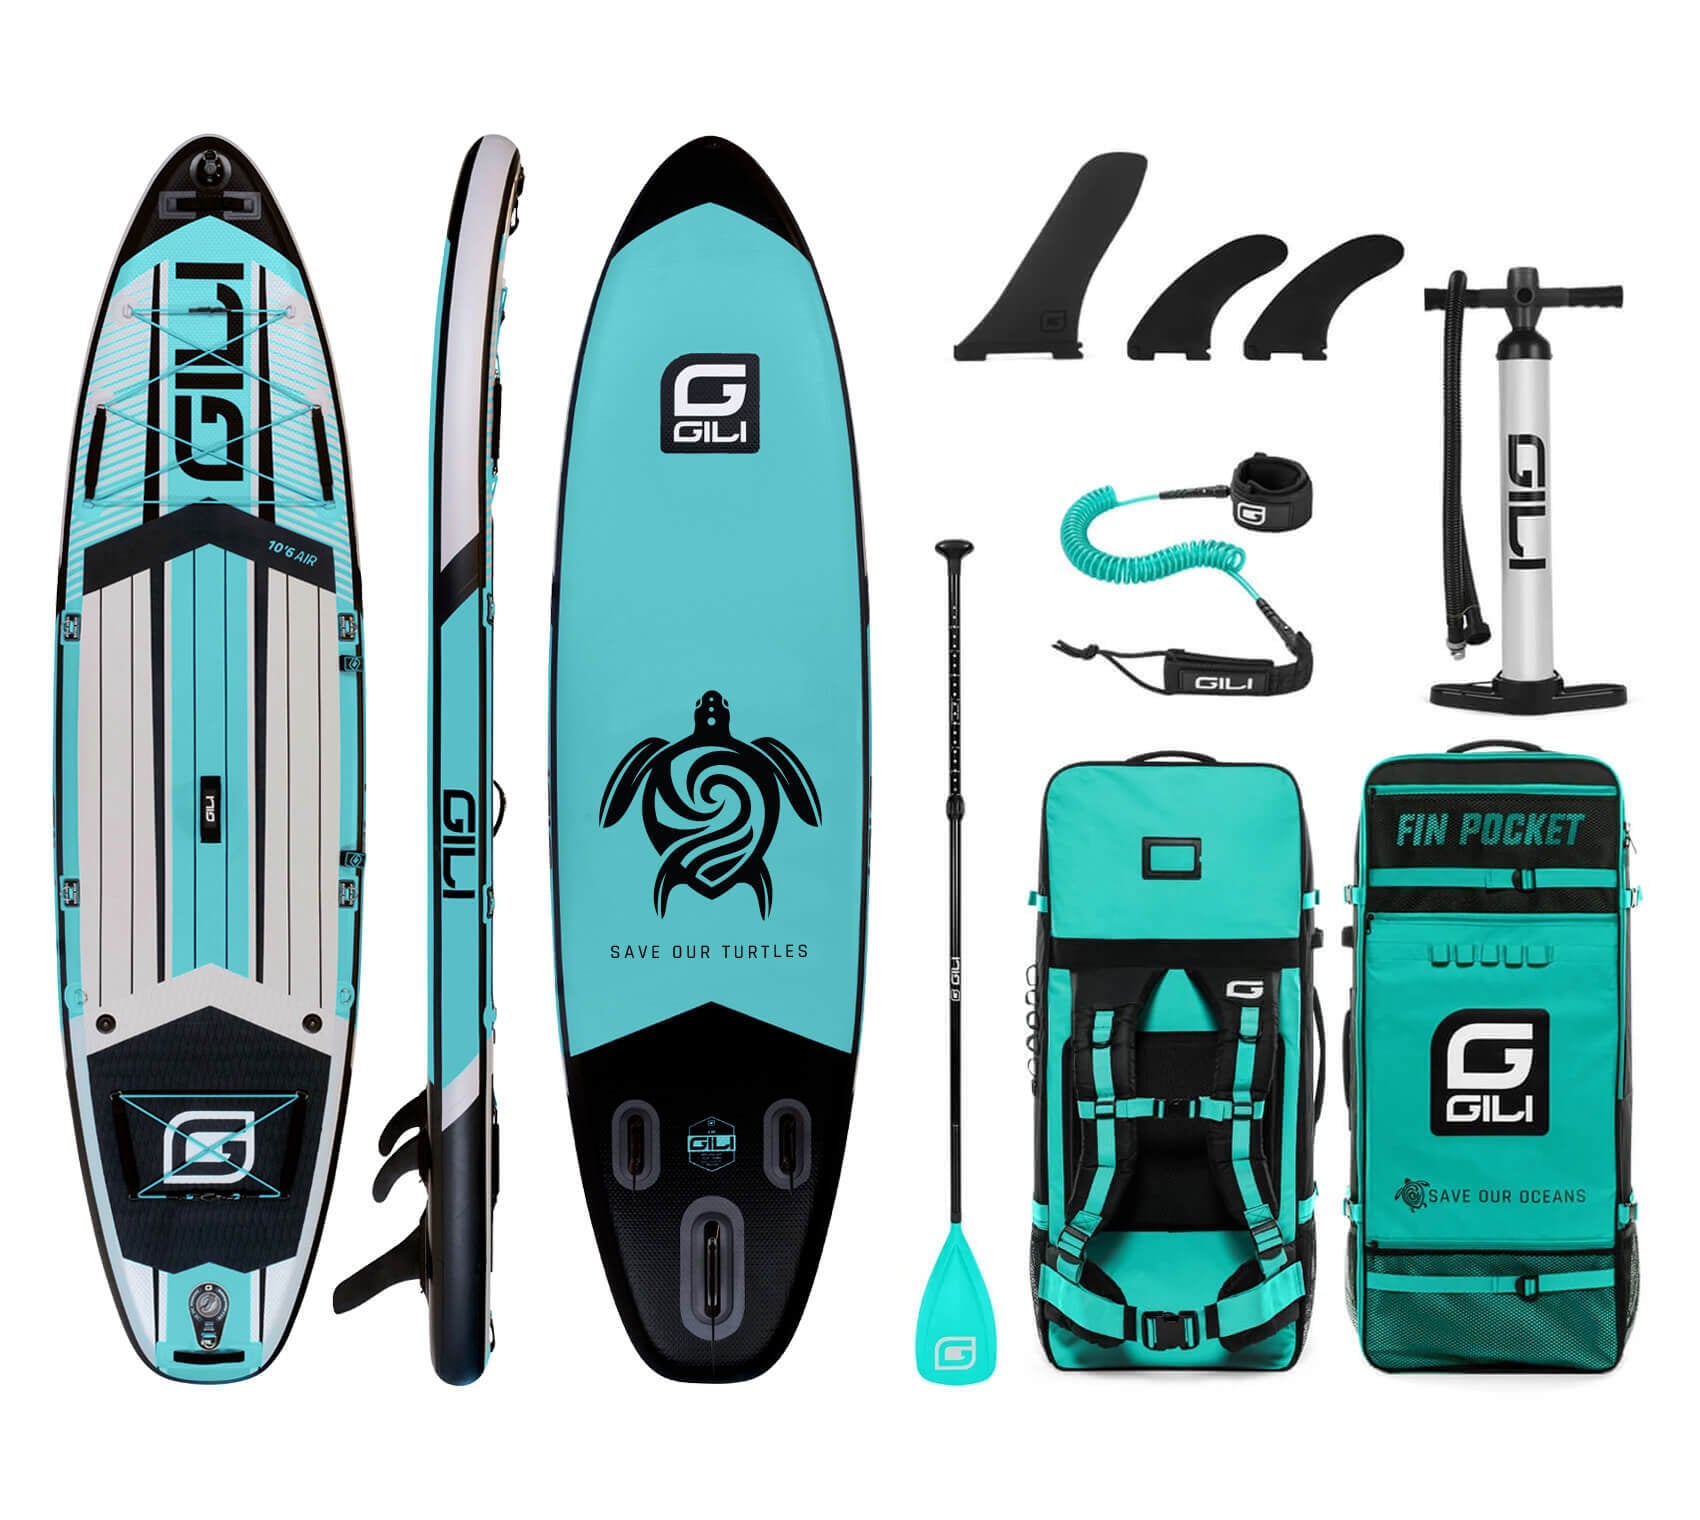 Ciencias Sociales He reconocido Cuarto 10'6 / 11'6 AIR Inflatable Stand Up Paddle Board - GILI Sports